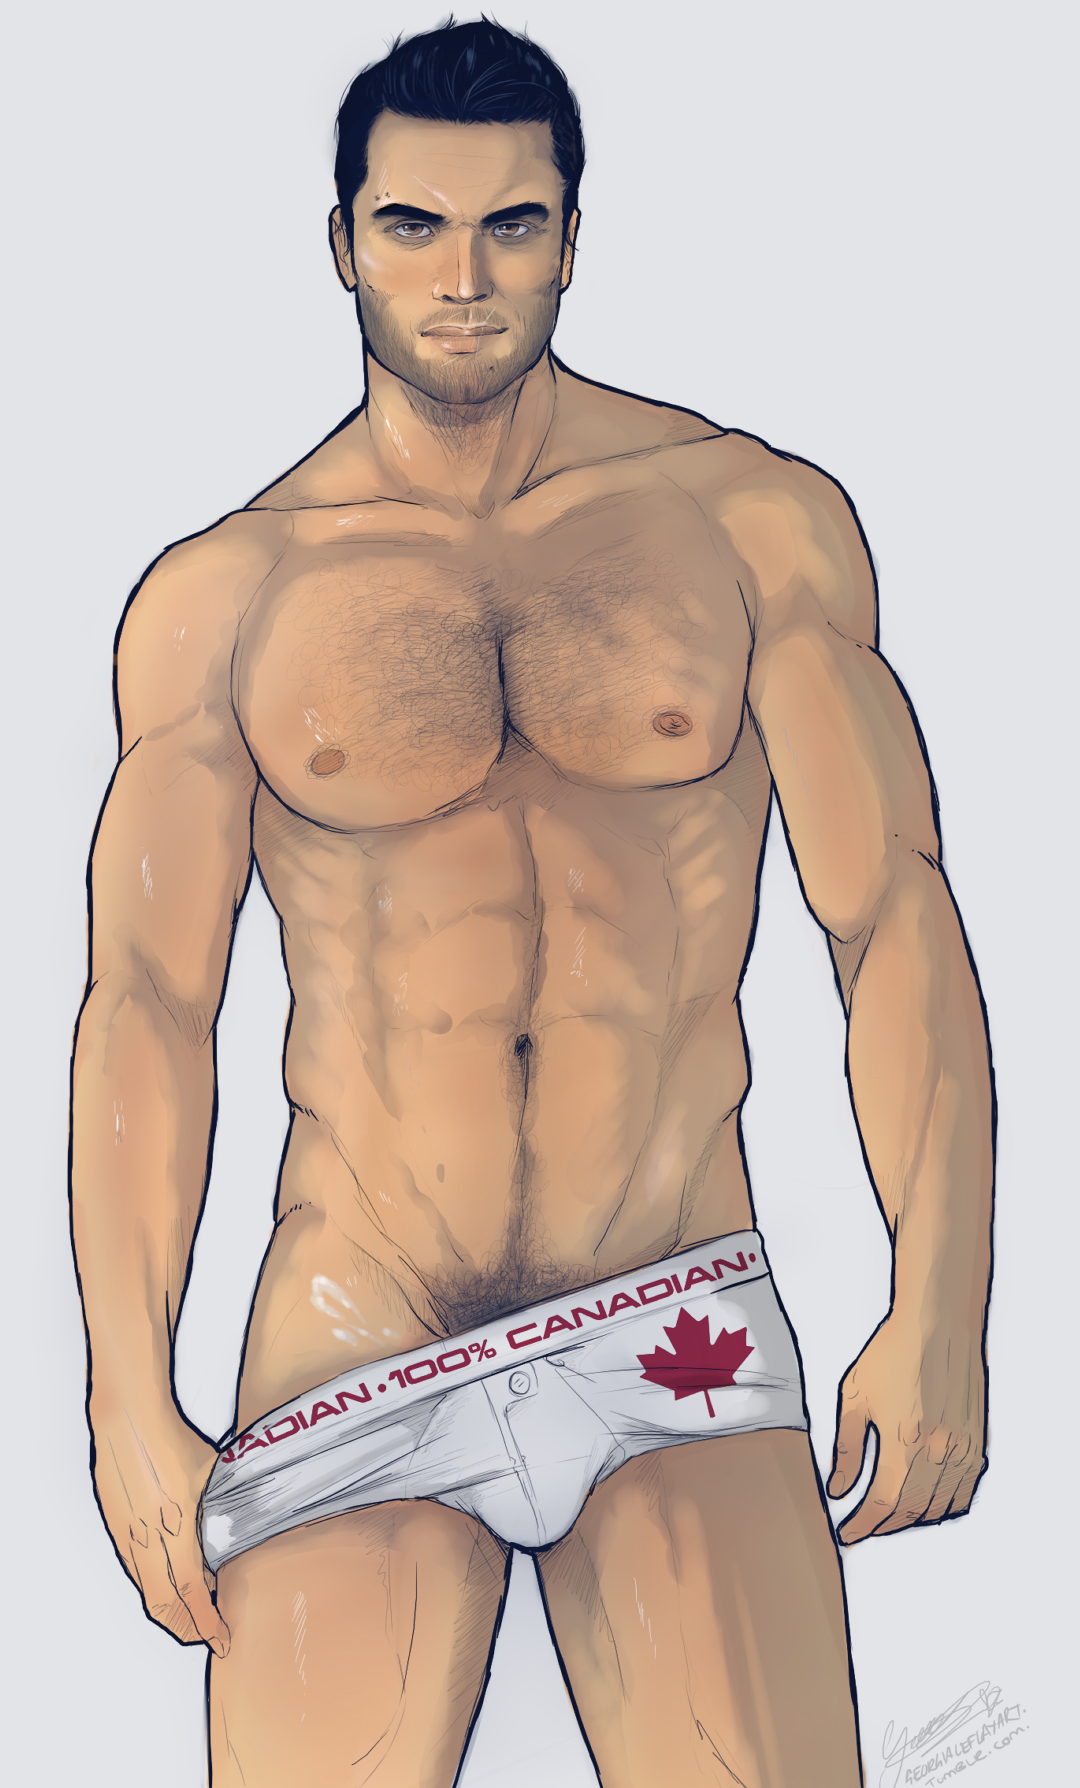 georgialeflayart:  Happy Canada day! I’m from the UK but any reason to draw this